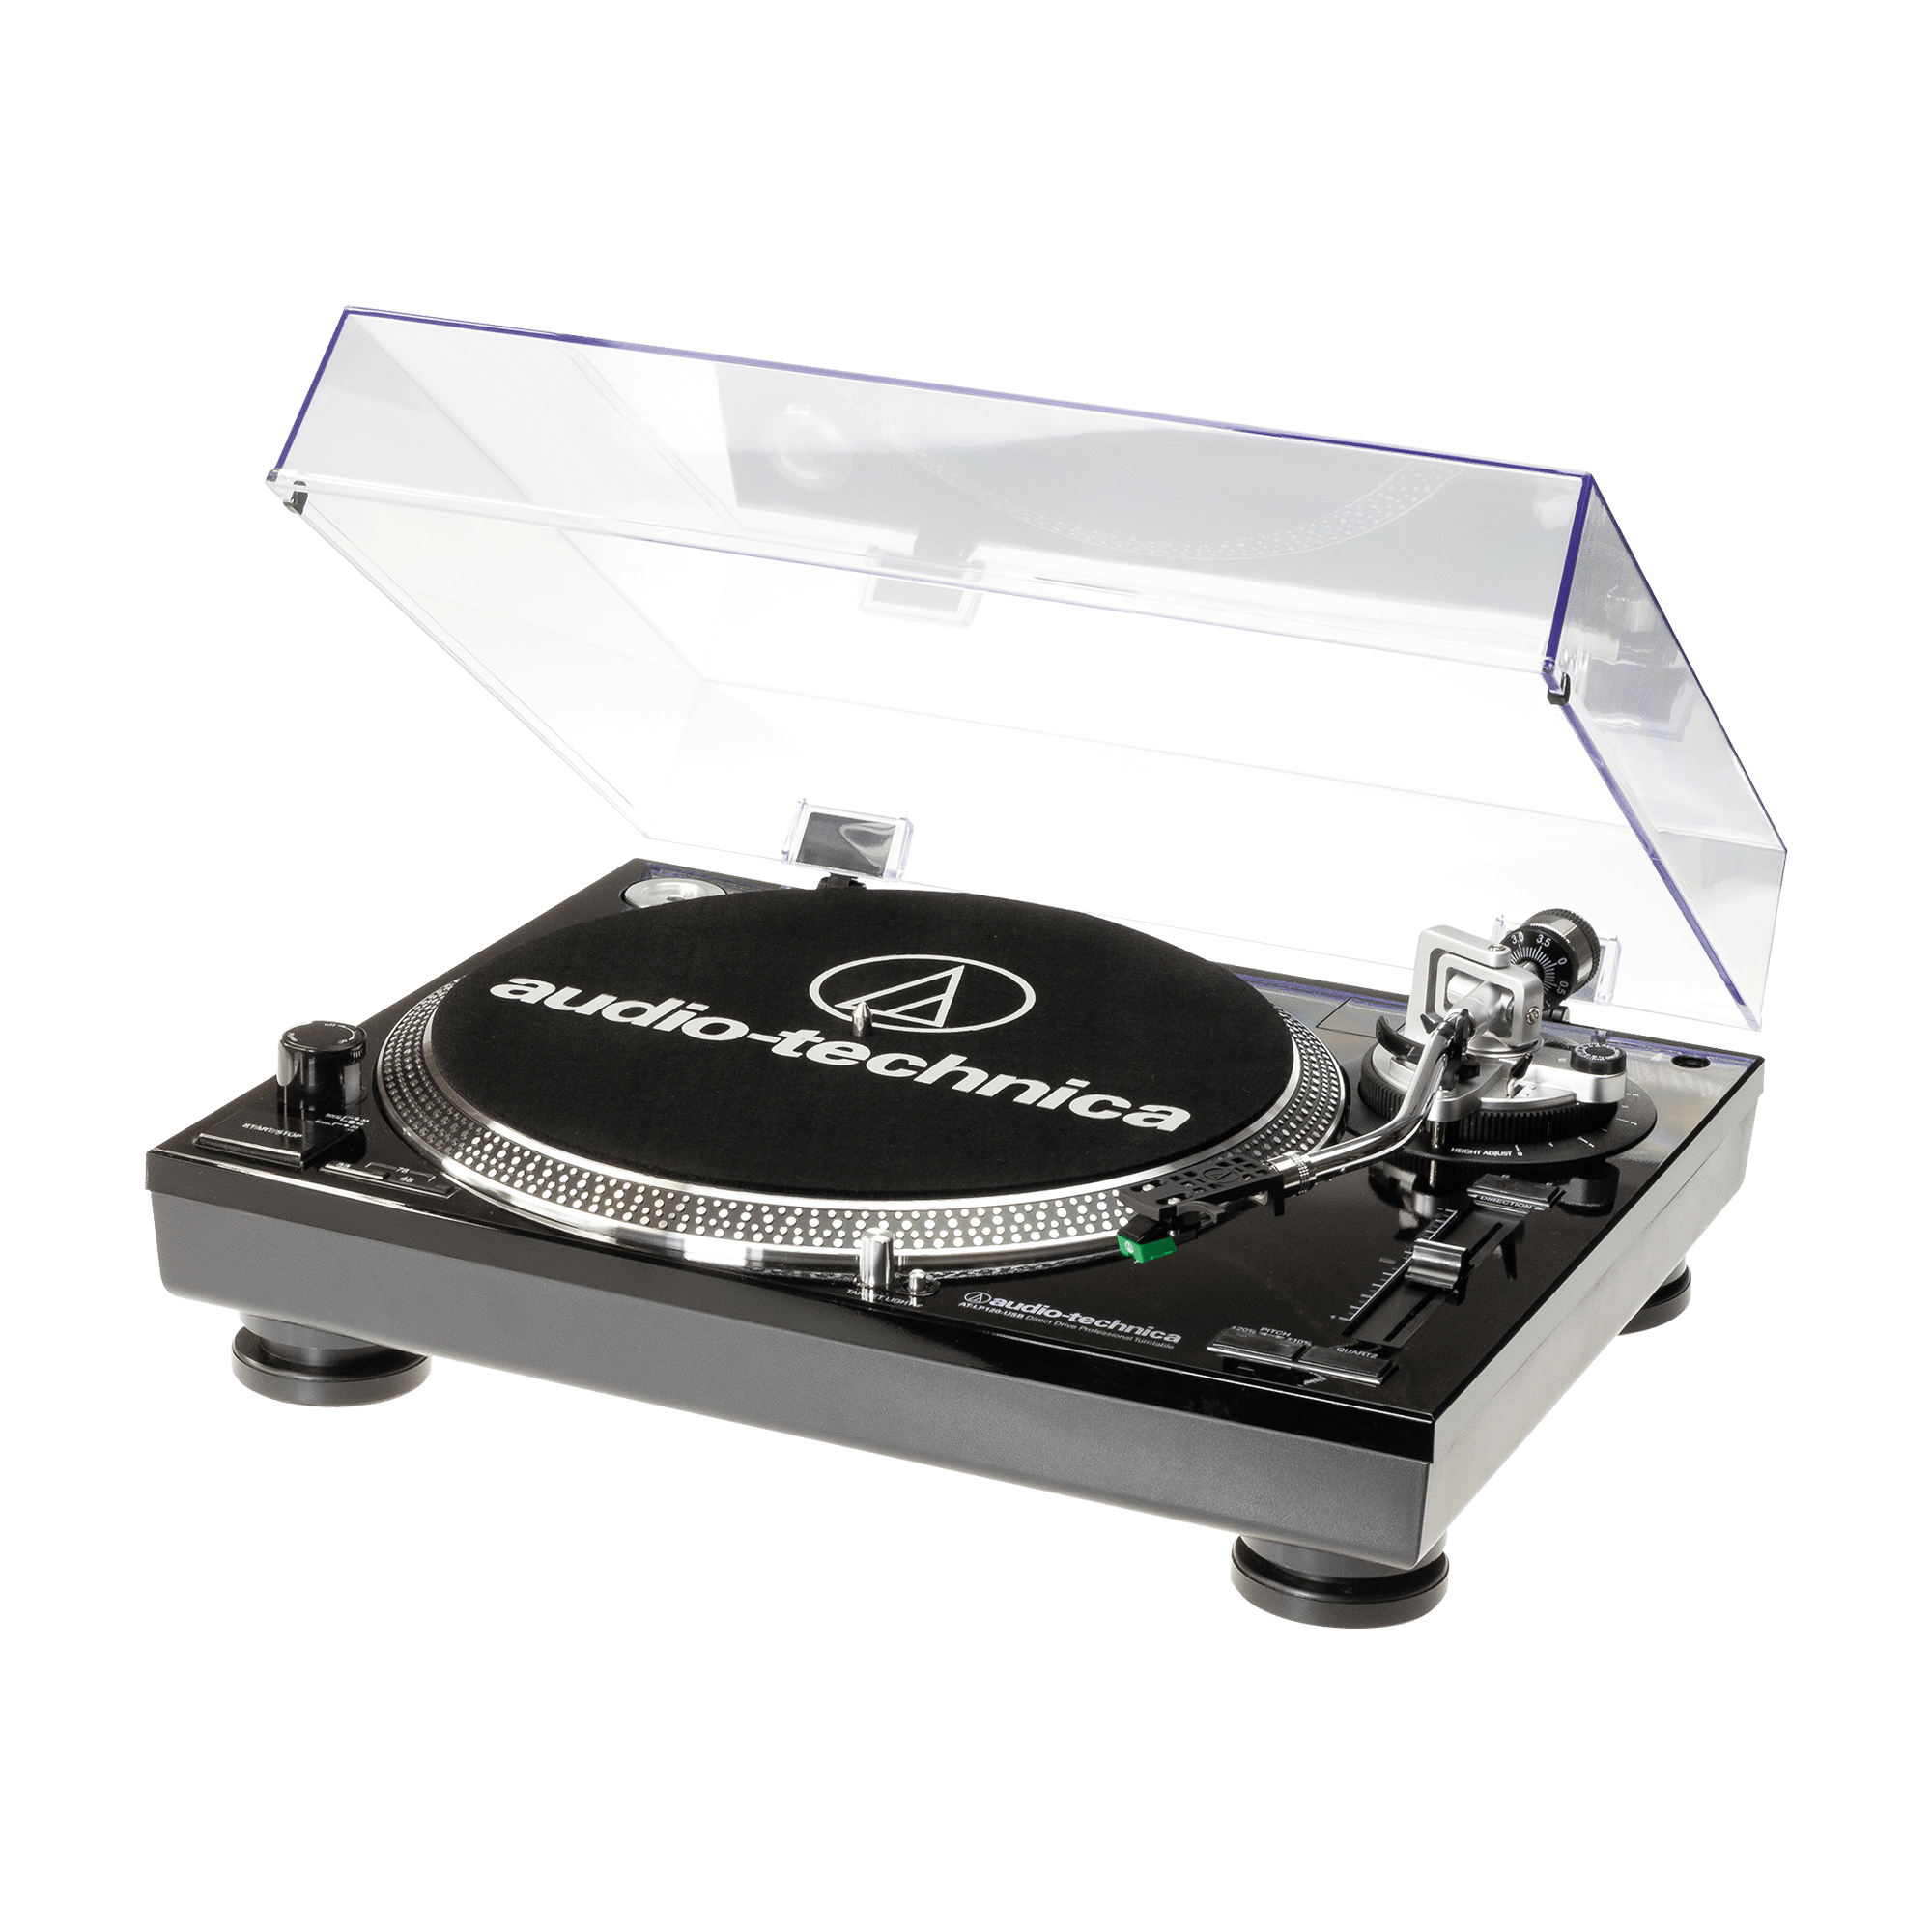 AT-LP120-USBHCDirect-Drive Professional Turntable